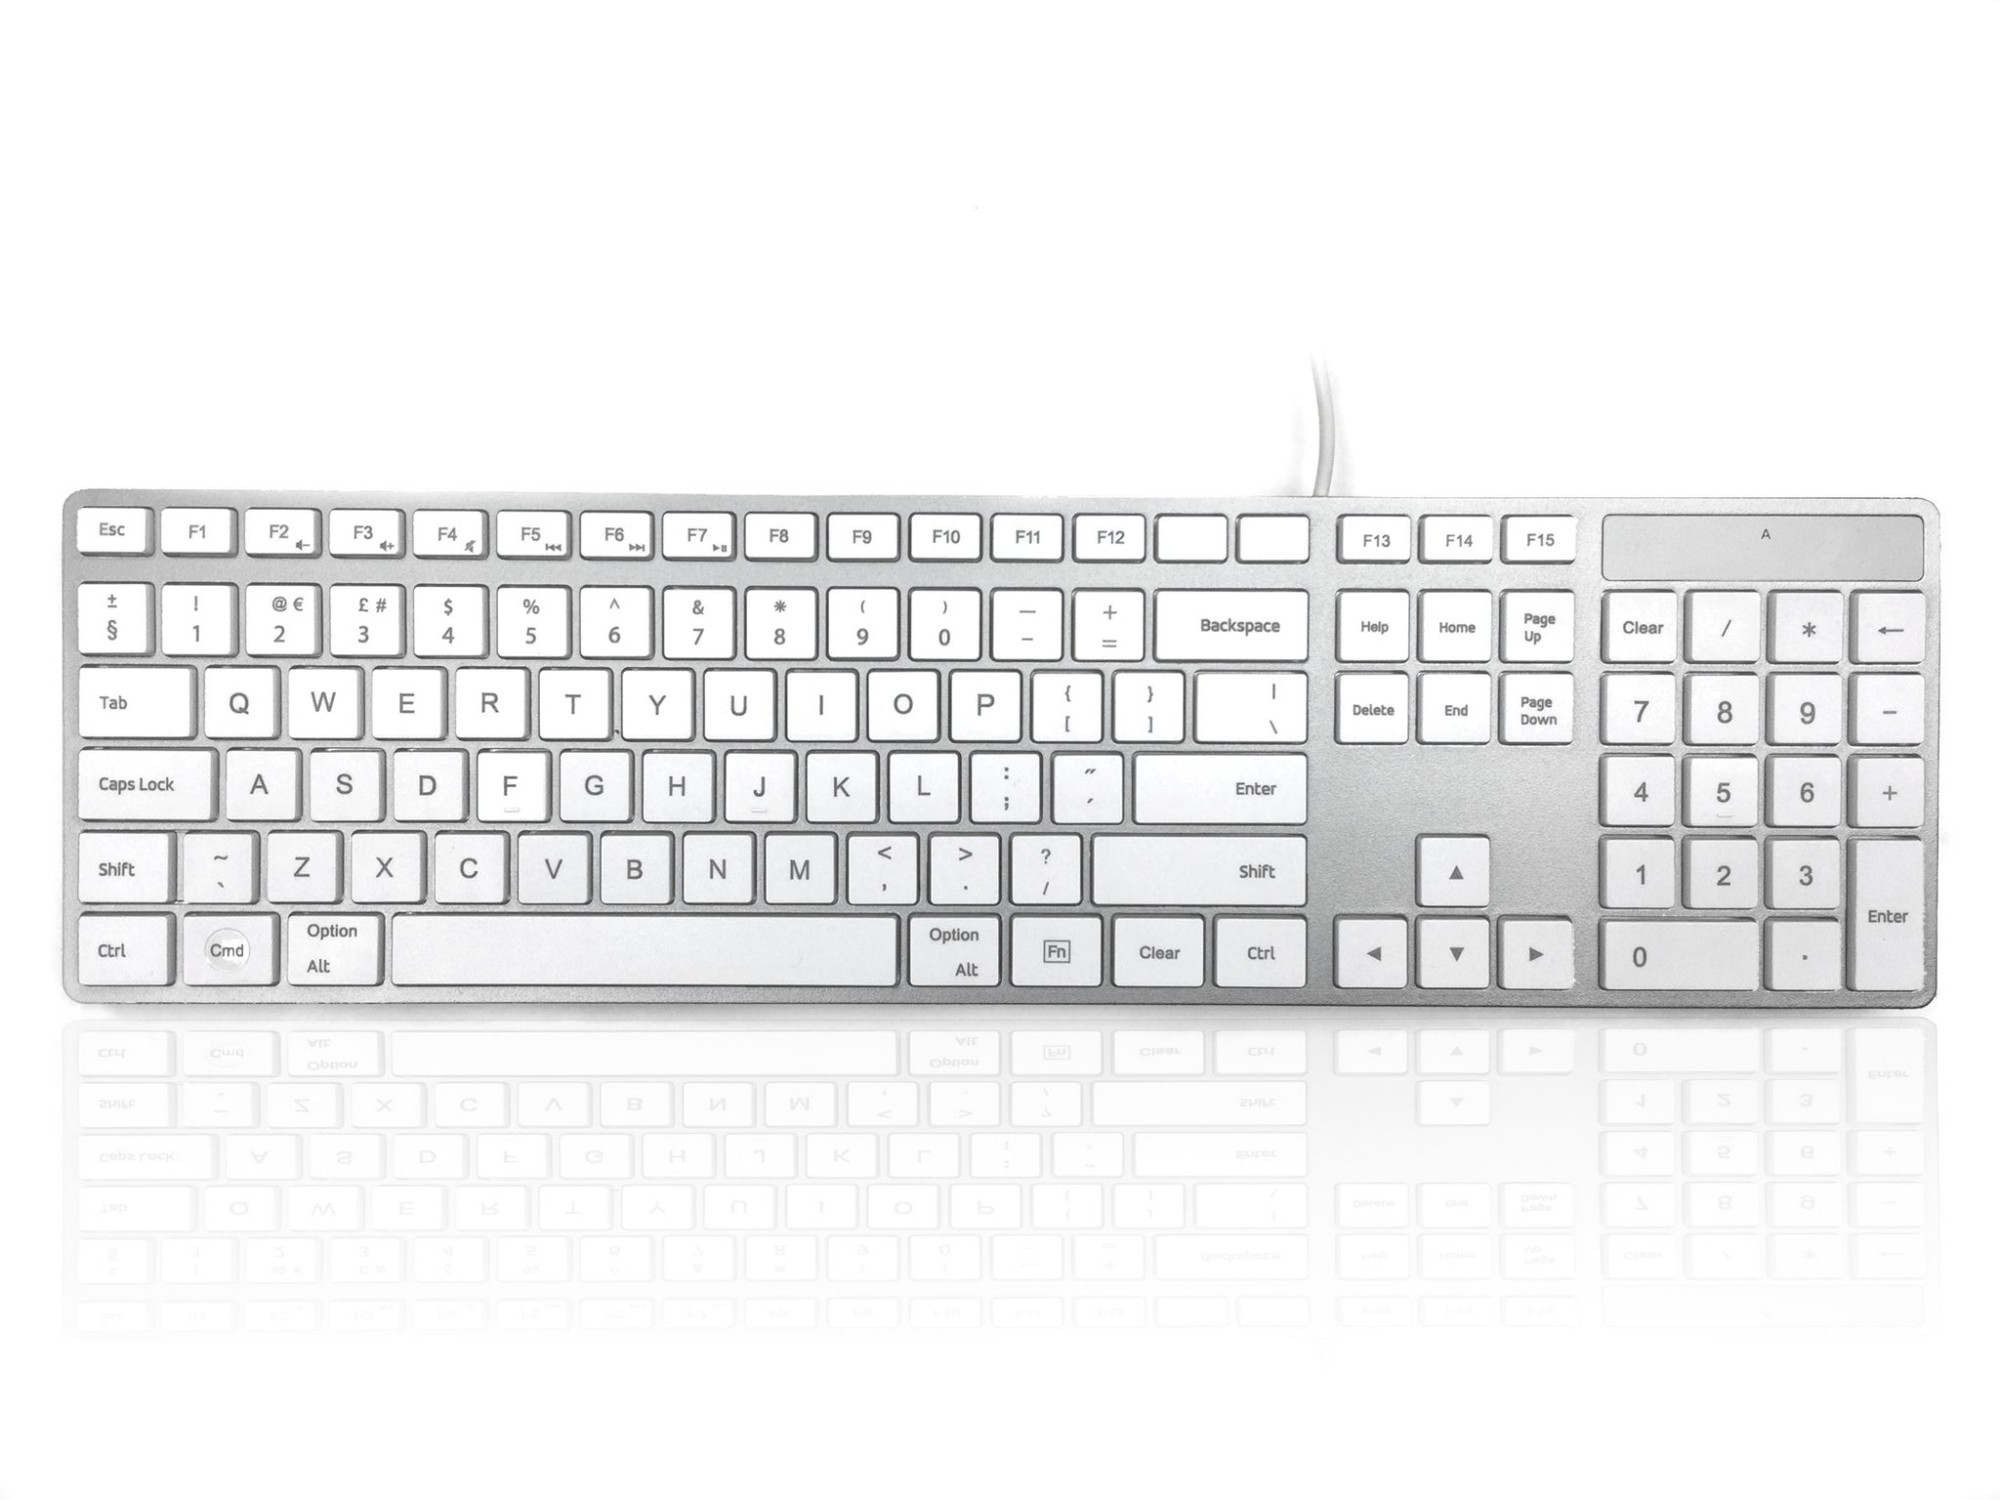 KYBAC301-USBCMAC CERATECH 301 MAC USB Type C - USB Type C Wired Full Size Apple Mac Multimedia Keyboard With White Square Tactile Keys And Silver Ca